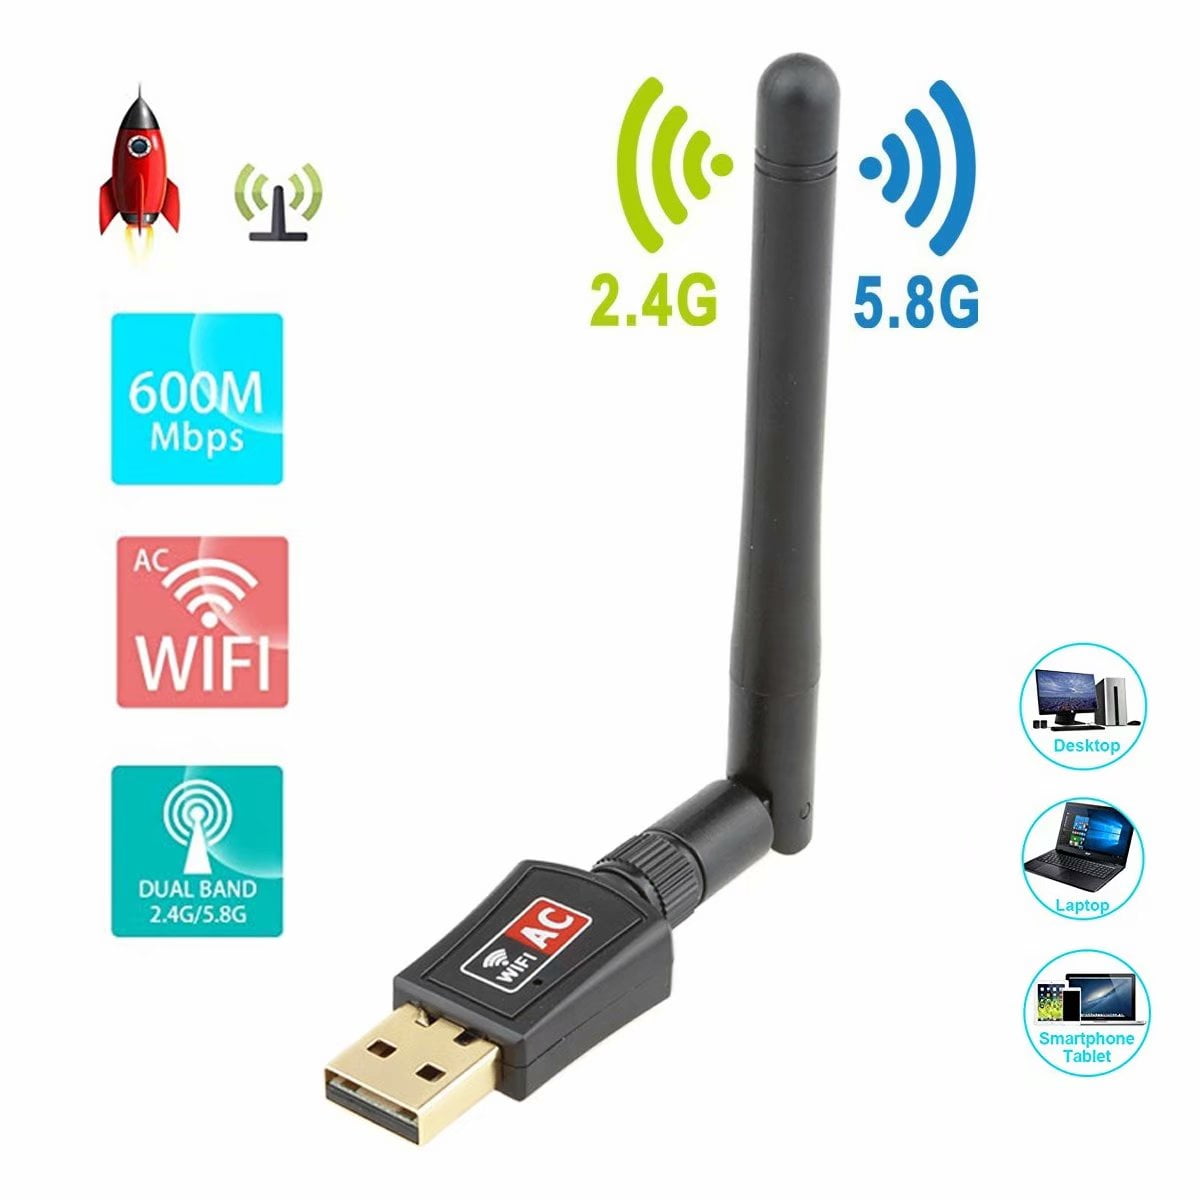 Wireless USB Wifi Adapter AC600Mbps Dual Band 2.4G/5GHz for PC Laptop & Desktop 